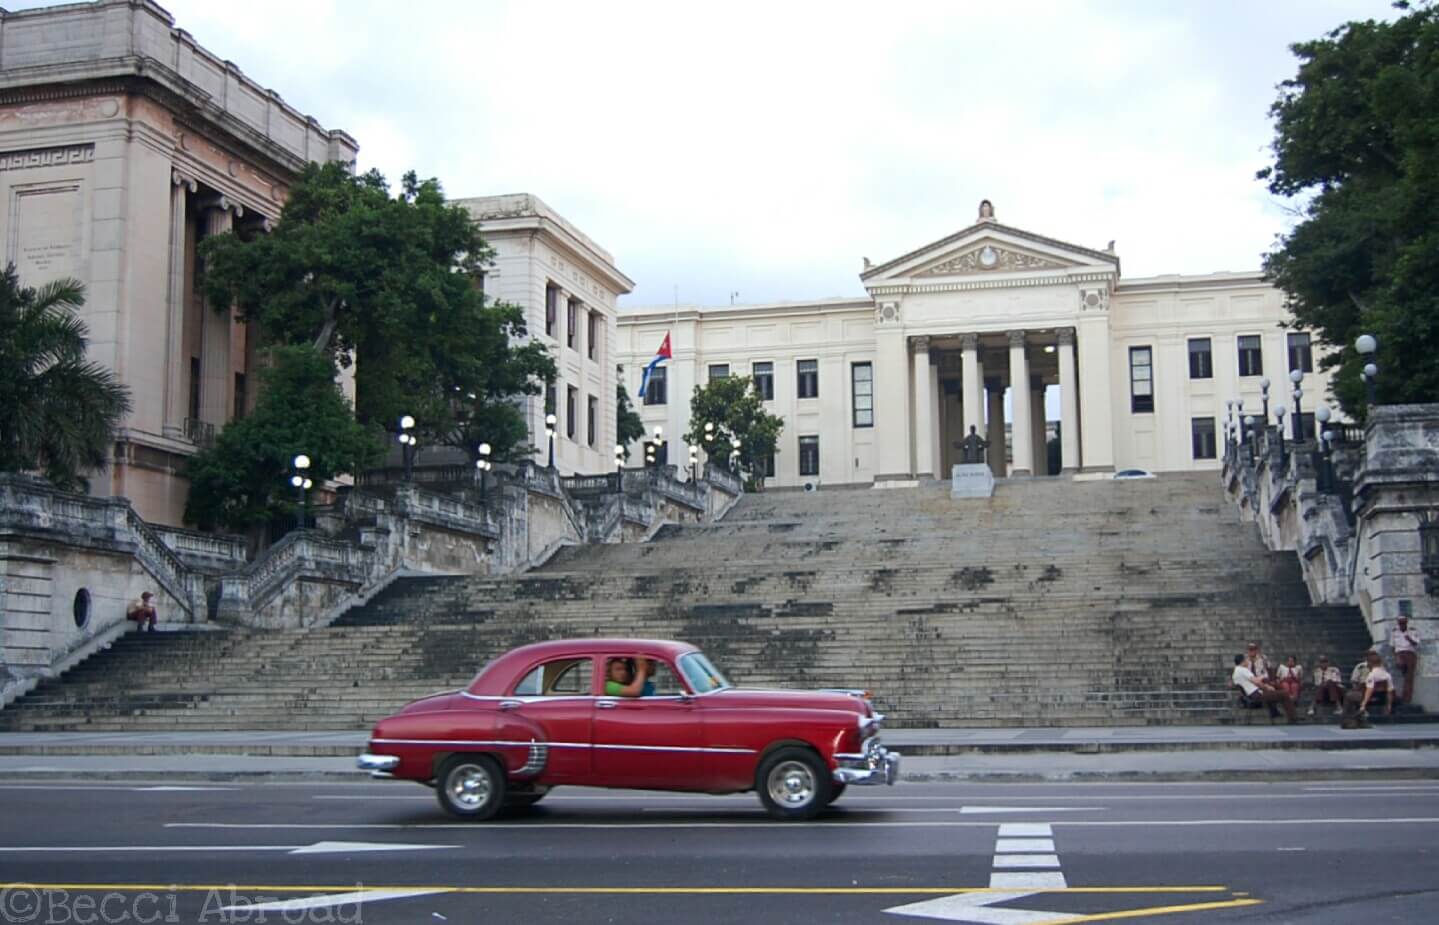 Spanish courses at the University of Havana is a perfect way to improve your Spanish and experience Cuba from within